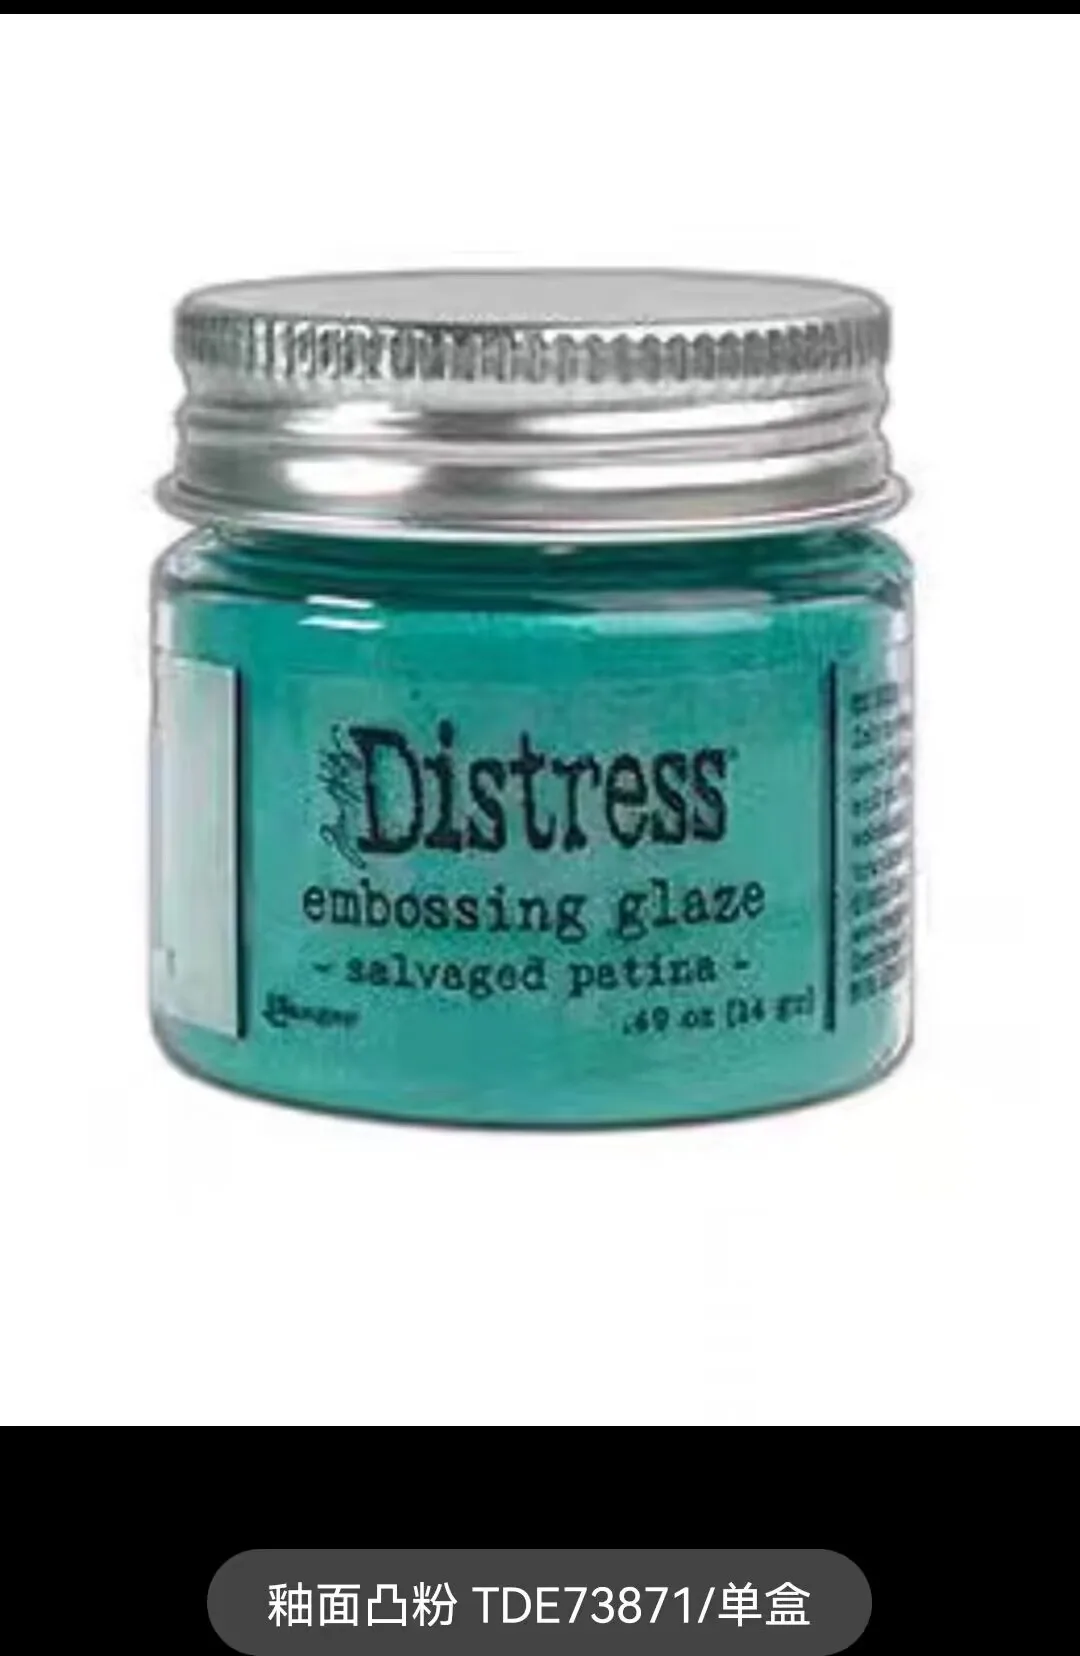 Tim Holtz Distress Crayons old color water soluble pastel set hand account  color smudge 6 colors